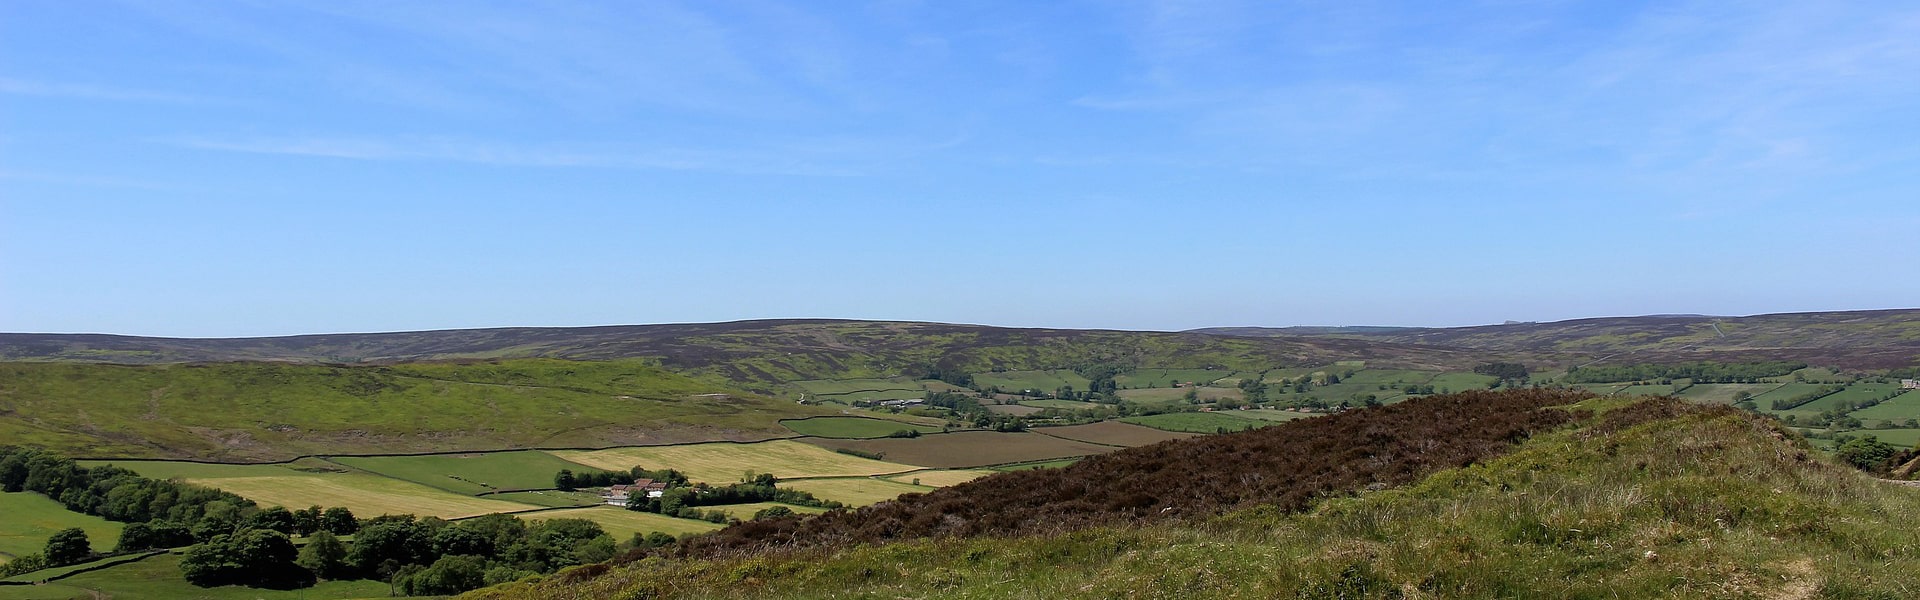 The Yorkshire moors